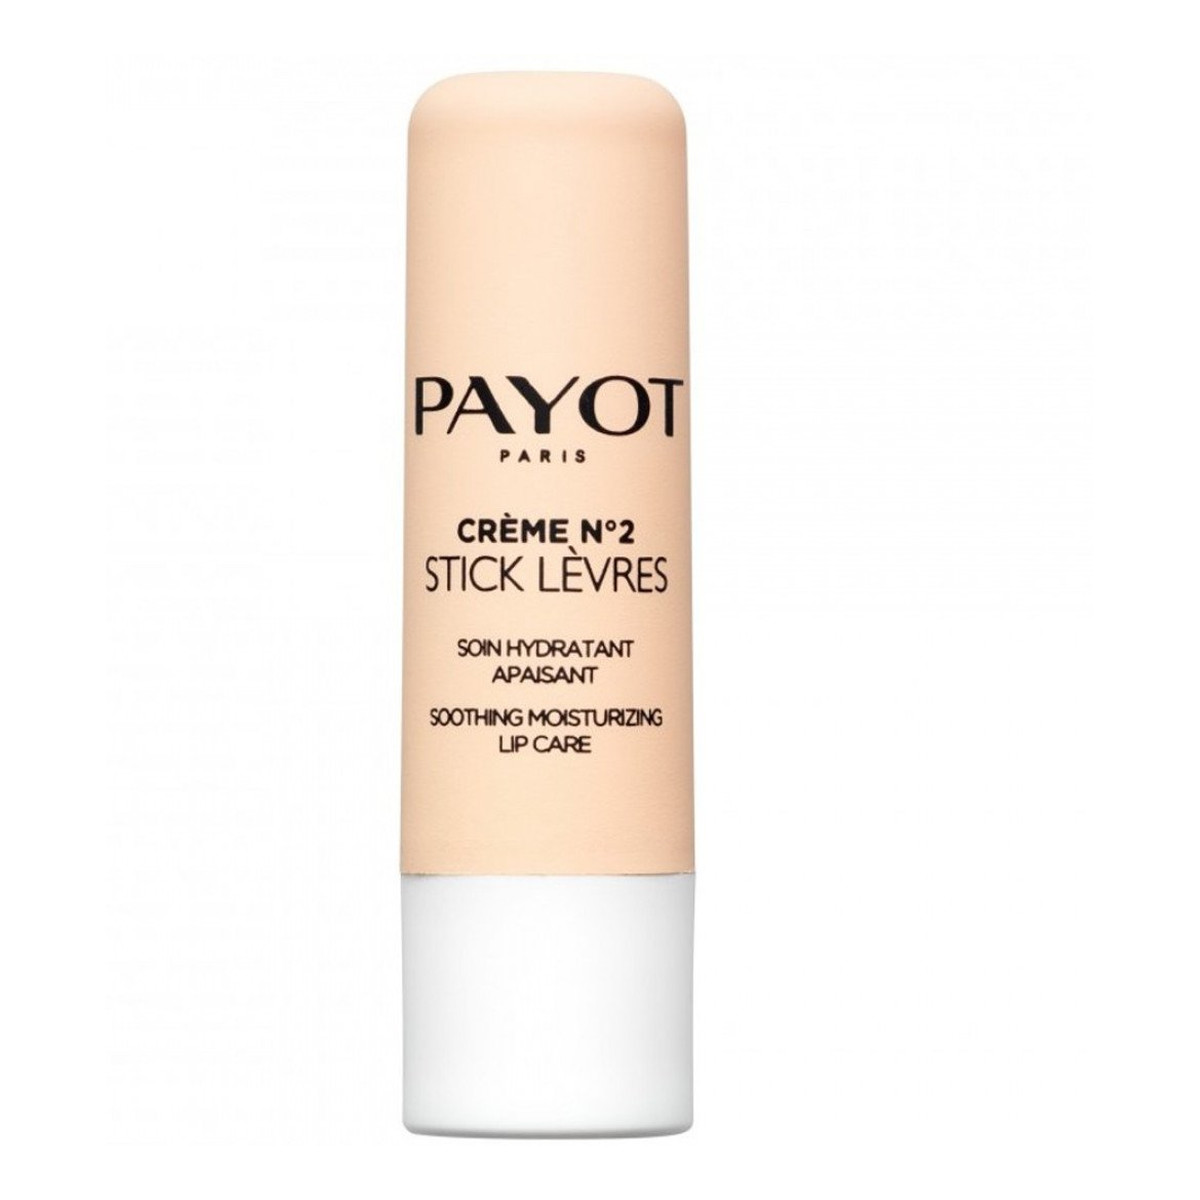 Payot Creme No 2 Stick Levres Balsam do ust 12x4g 48g